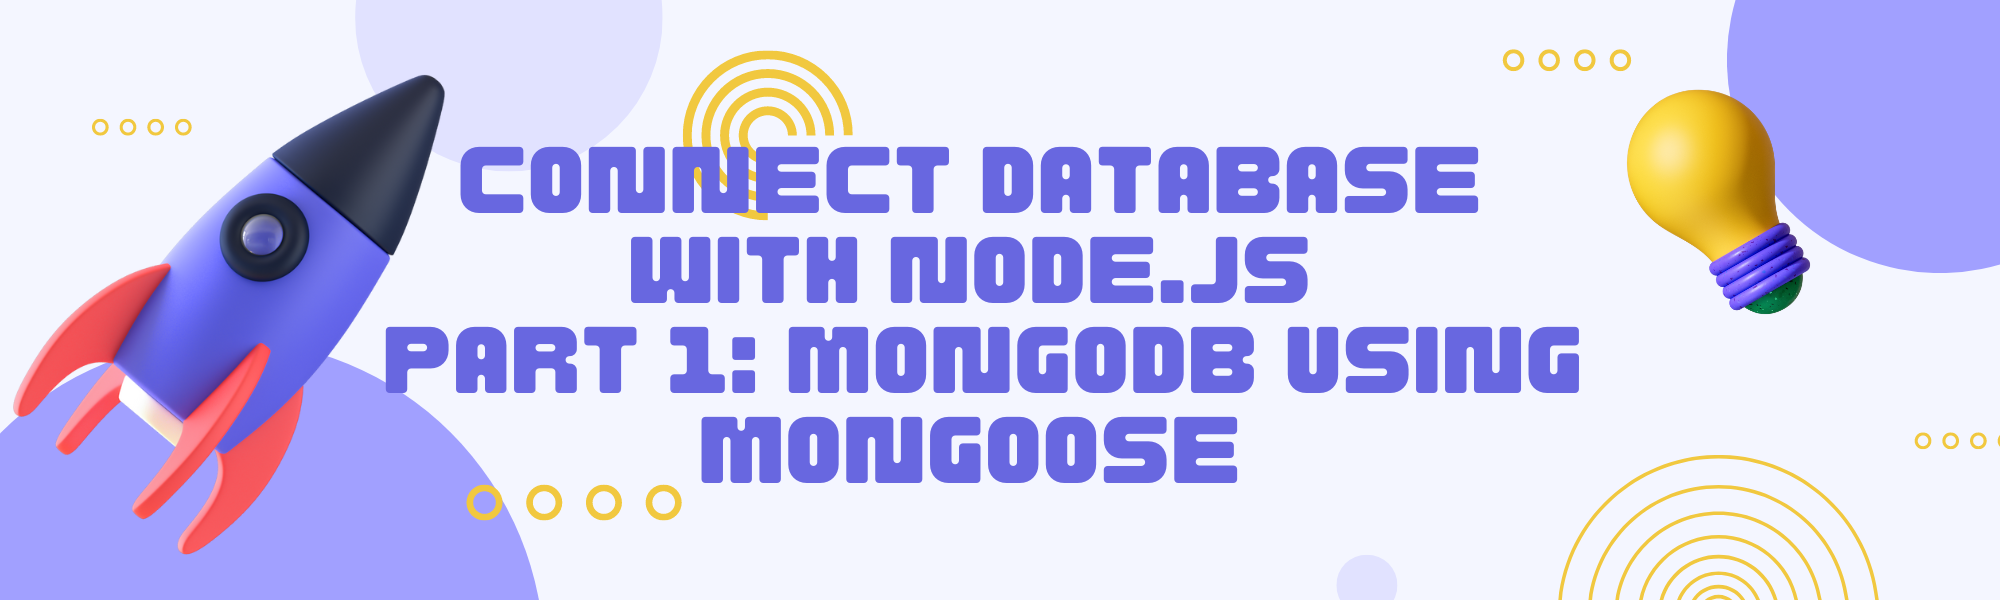 Connect Database with Node.js, Part 1: How to connect MongoDB in Node.js using Mongoose